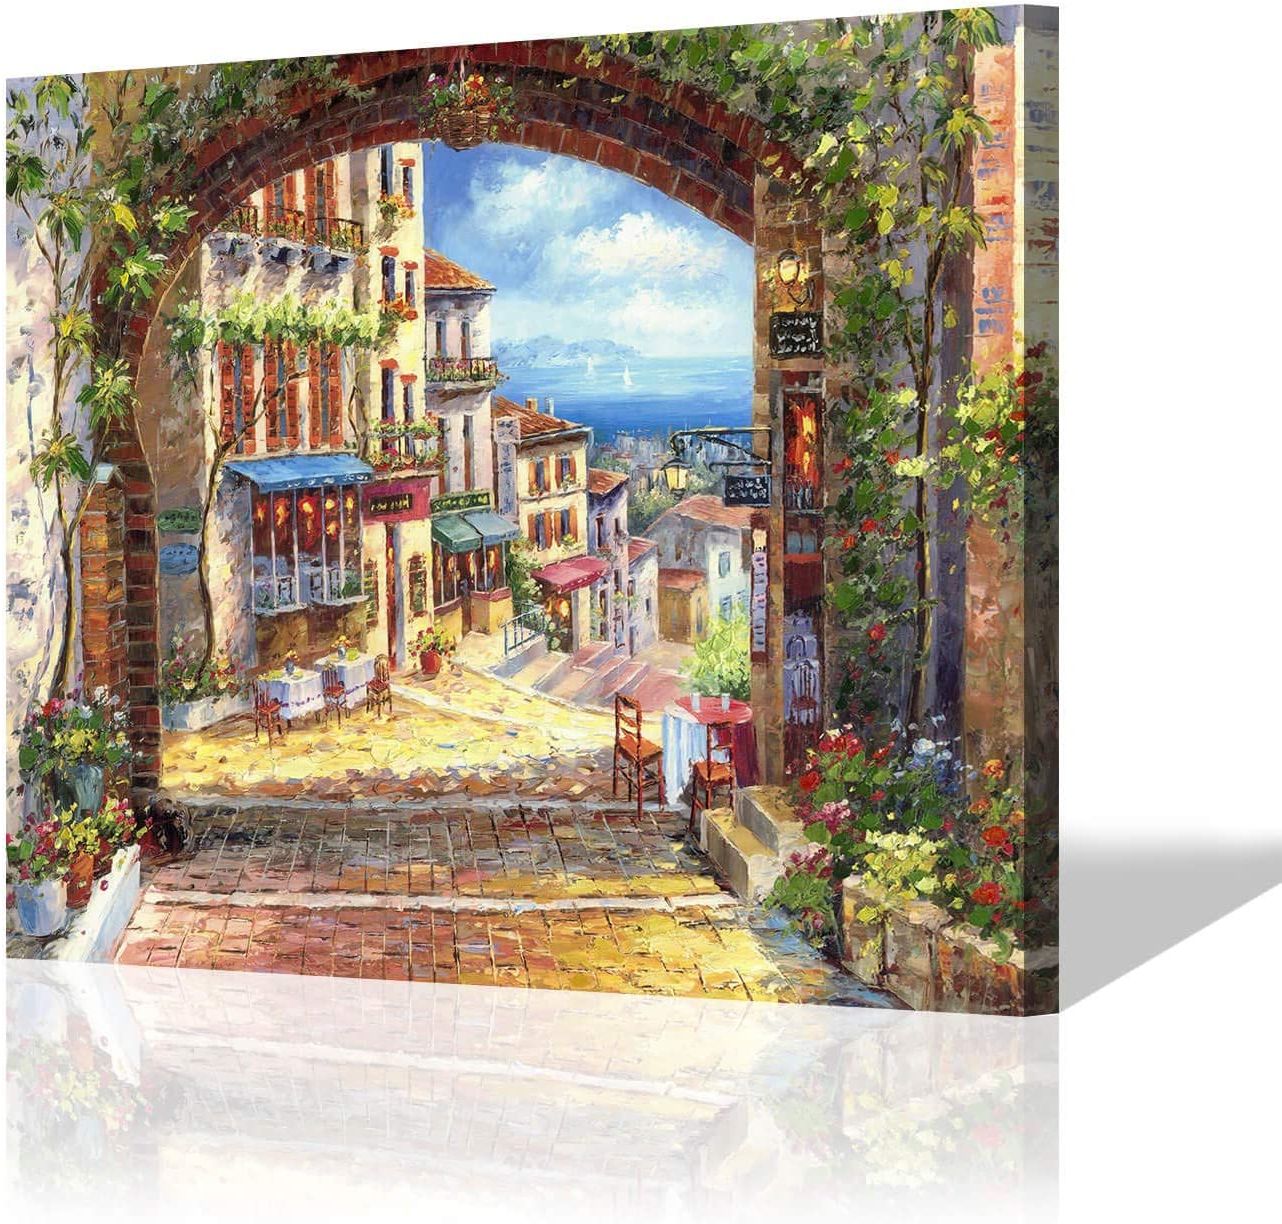 Town Wall Art Throughout Widely Used Buy Sd Soft Dance Italian Town Canvas Wall Art – Coastal Village Painting  Artwork Reproduction Print Decor For Living Room 24'' X 18'' X 1 Panel  Online At Lowest Price In Italy. B086vwl6kd (Photo 2 of 15)